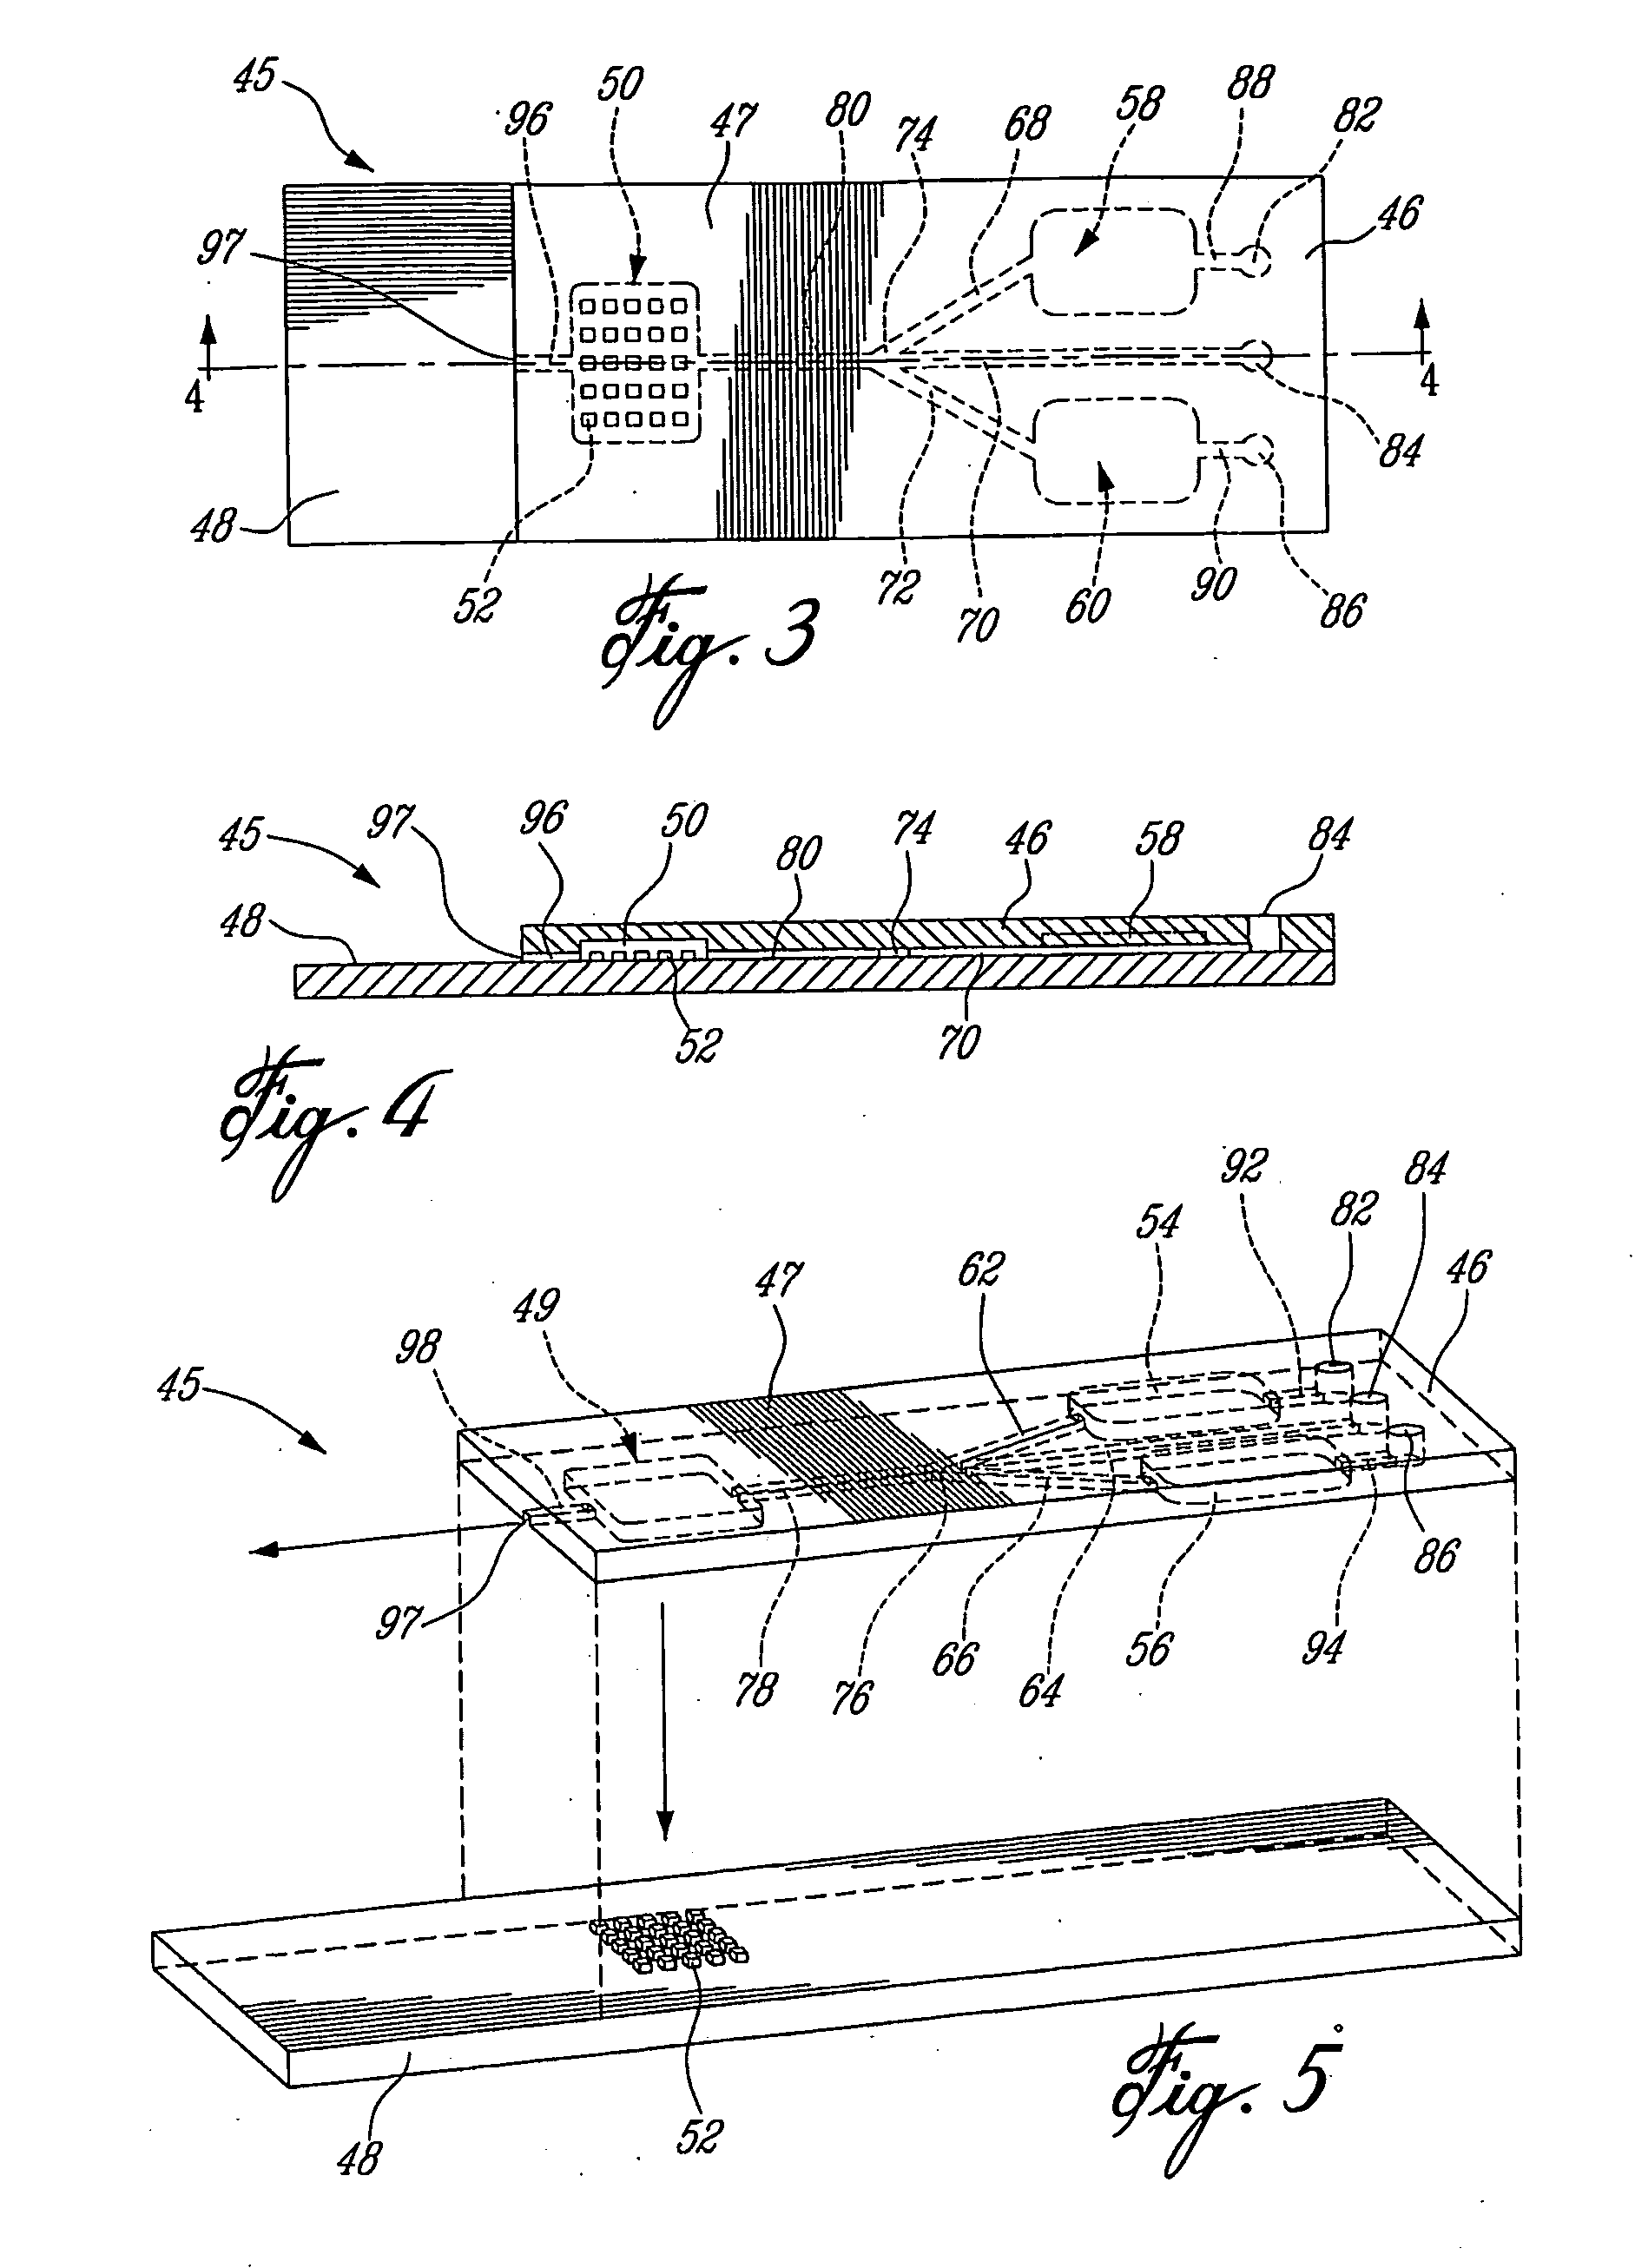 Removable microfluidic cell